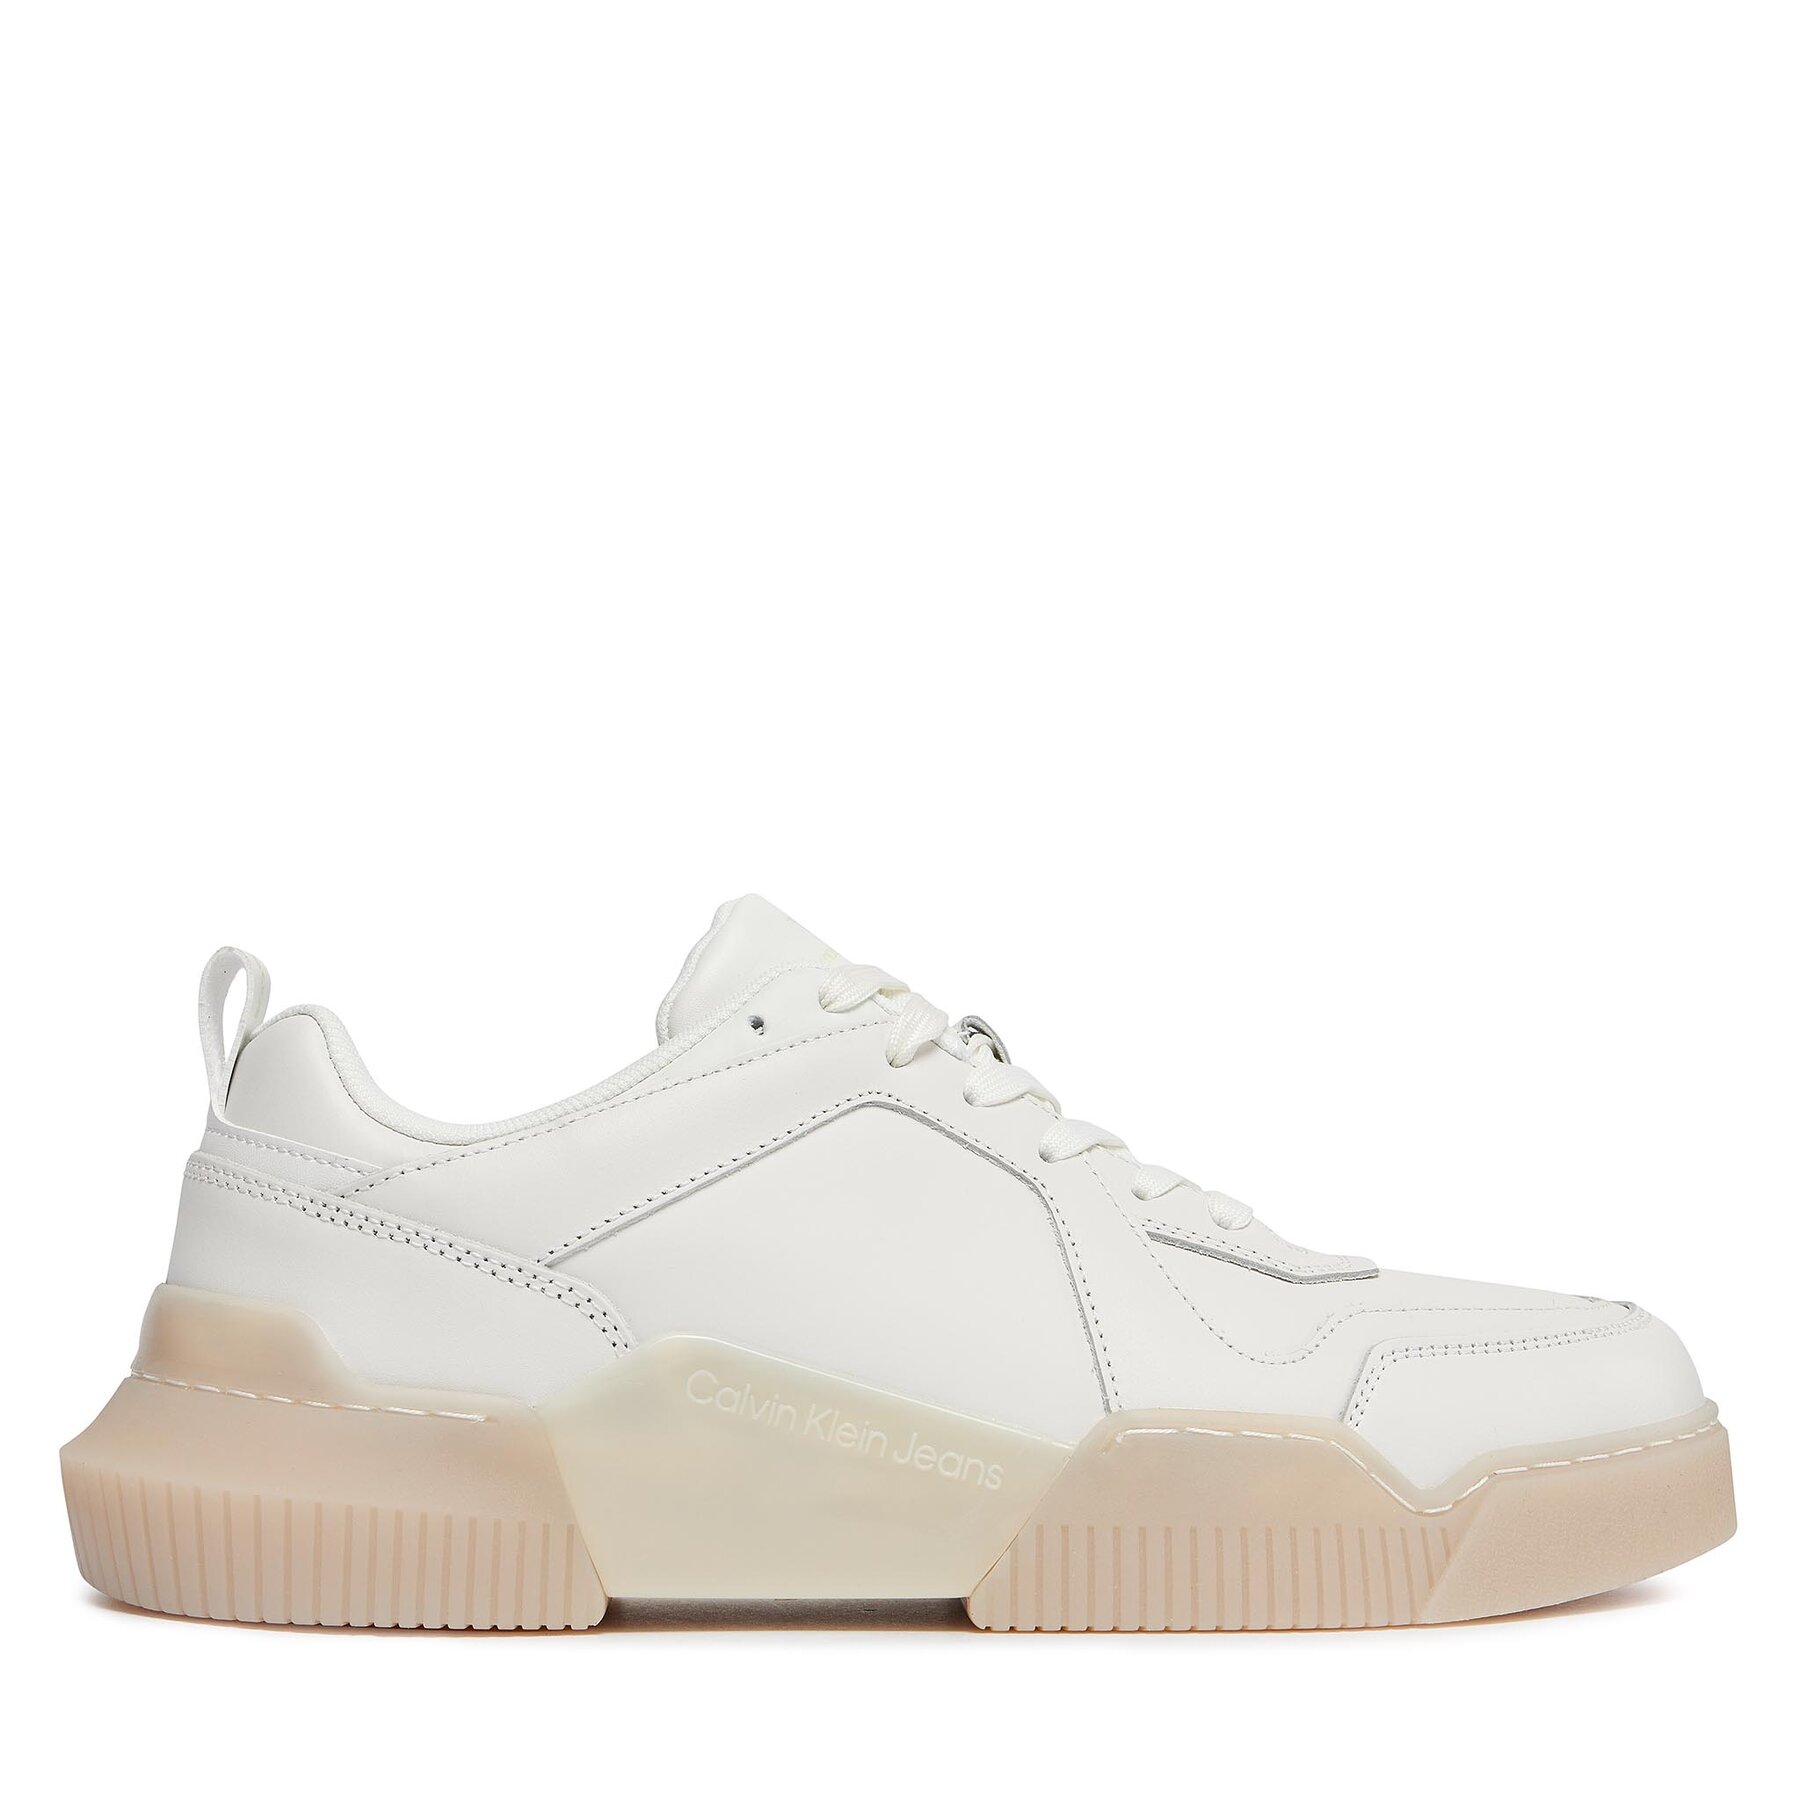 Sneakers Calvin Klein Jeans Chunky Cup 2.0 Low Lth Lum YM0YM00876 Bright White/Luminescent YBR von Calvin Klein Jeans